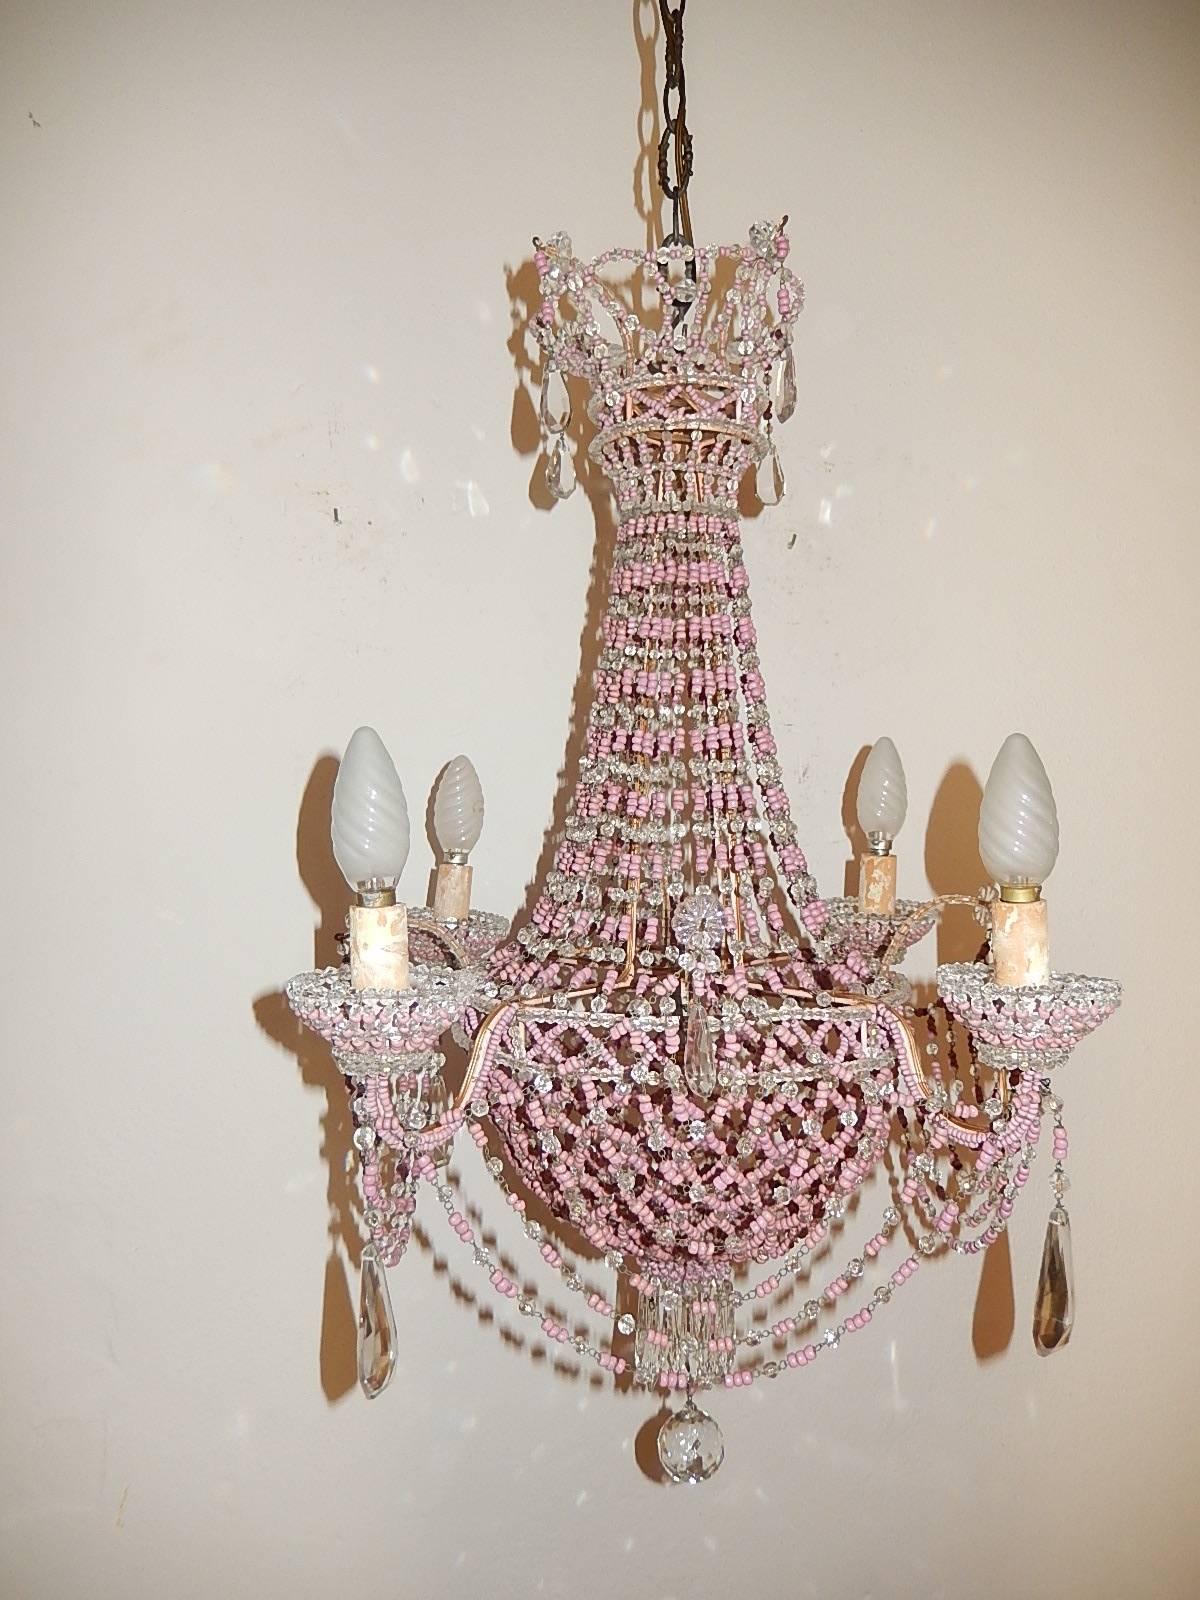 Housing five lights, four outside in beaded bobeches and one in center. Hand beaded and tied. Rare pink opaline beads, crystal beads and prisms. Beaded basket on bottom. Re-wired and ready to hang. Free priority shipping from Italy. Adding another